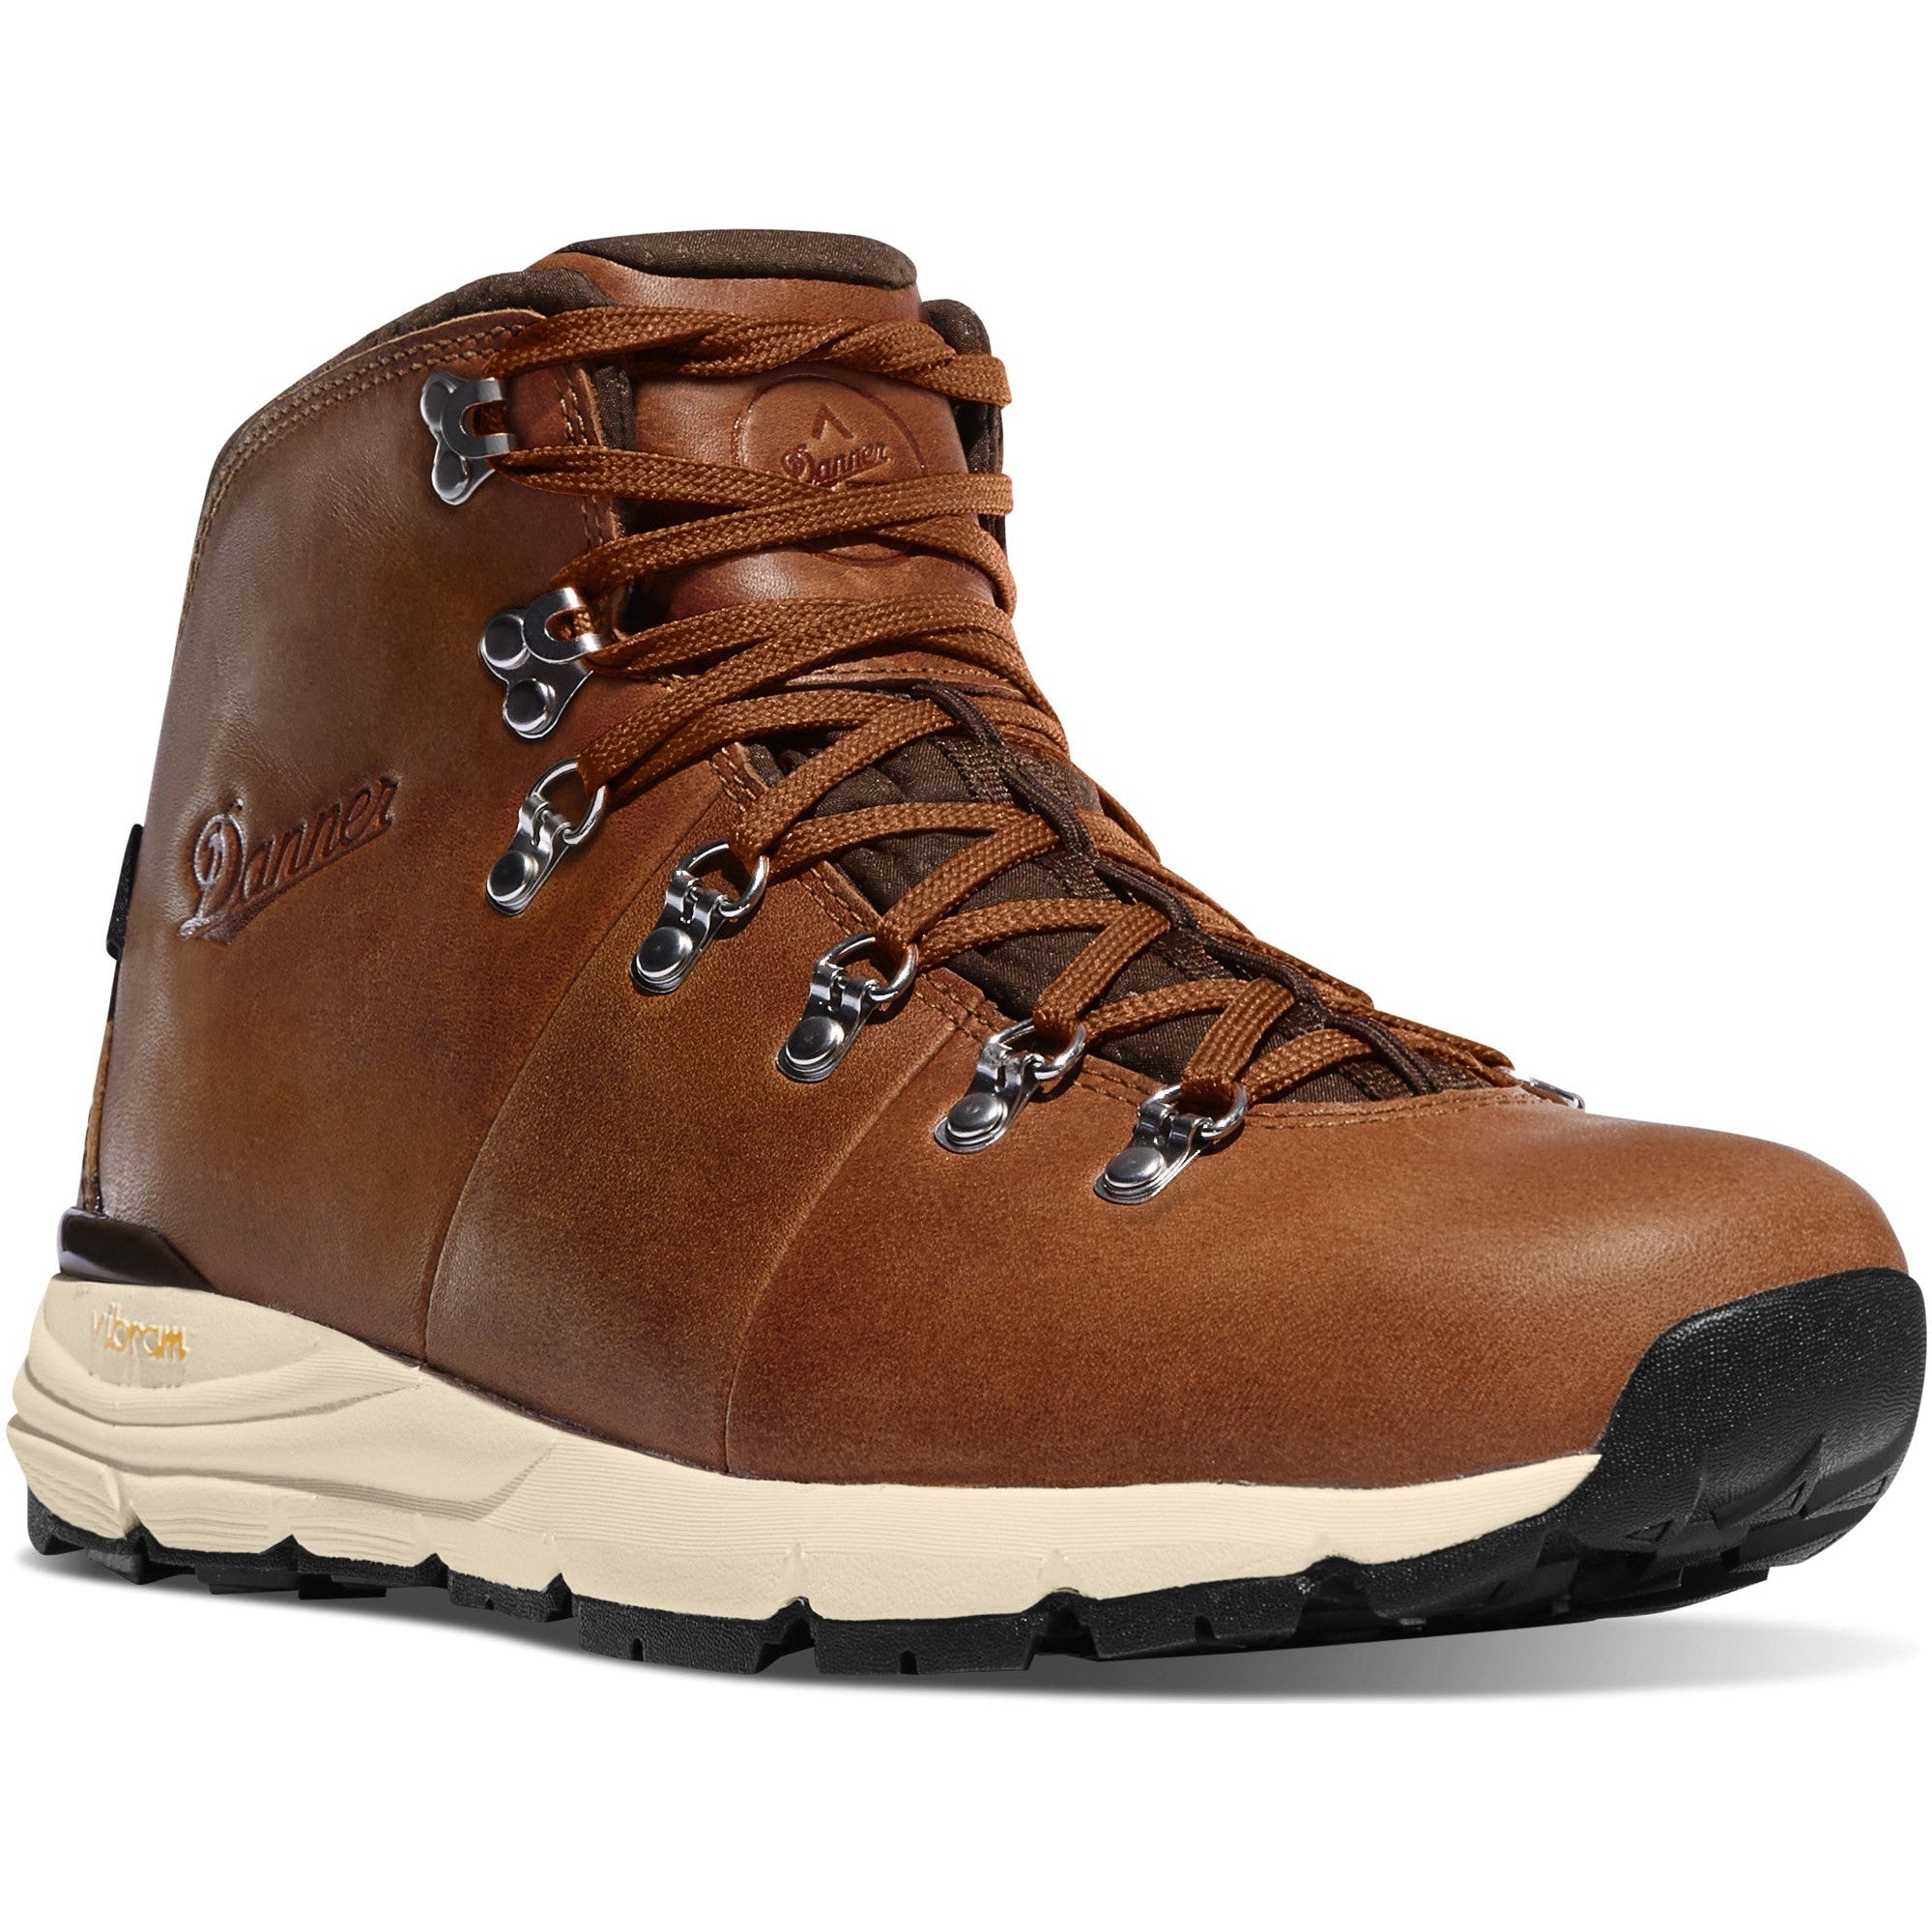 Danner Men's Mountain 600 4.5" WP Hiking Boot - Saddle Tan - 62246  - Overlook Boots